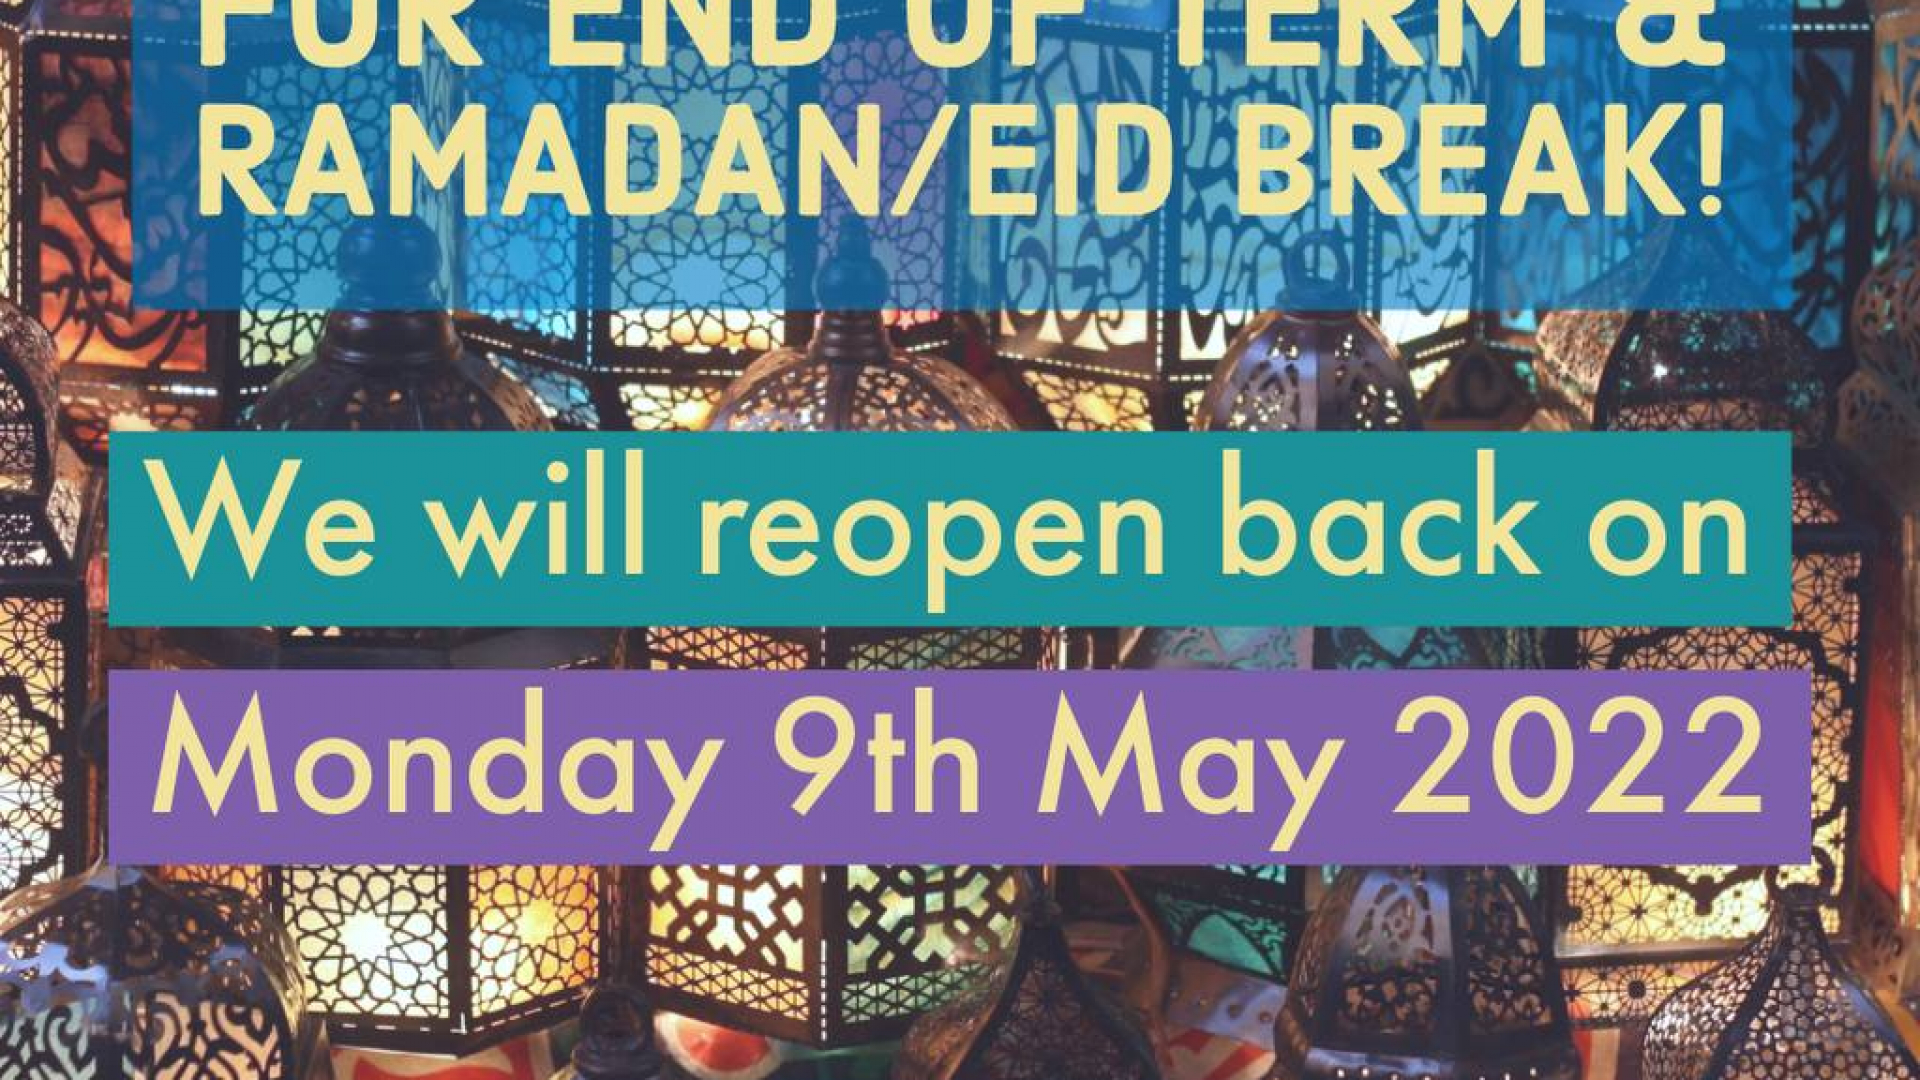 Tuition Club Closed for End of Term & Ramadhan!